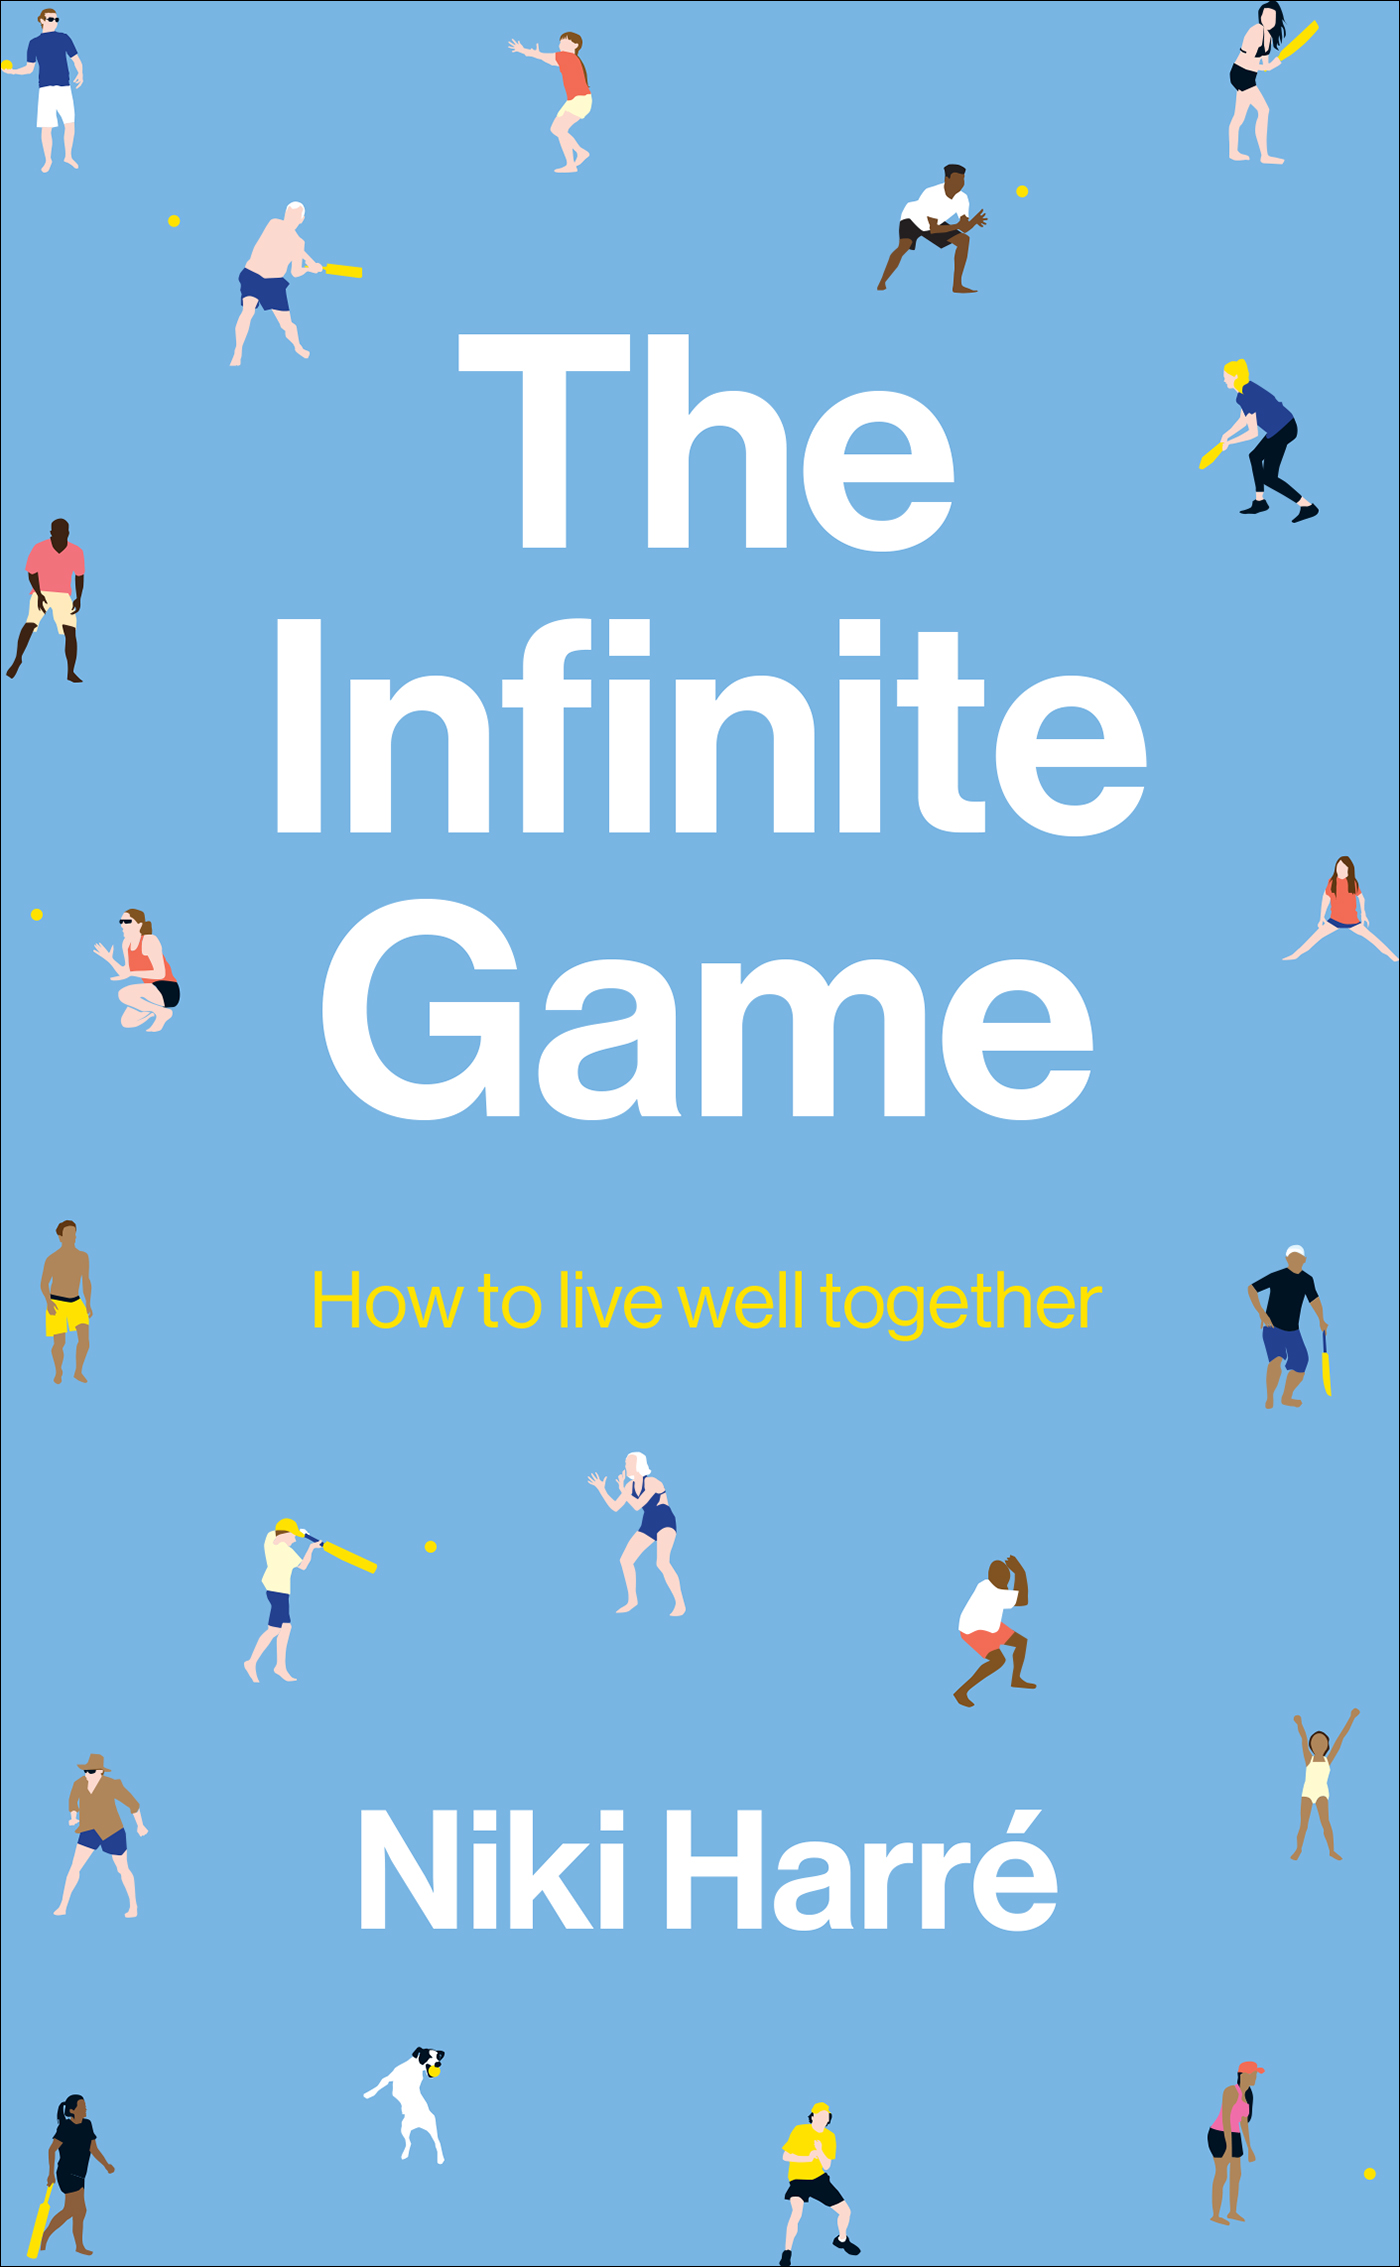 The Infinite Game The Infinite Game How to live well together Niki Harr - photo 1